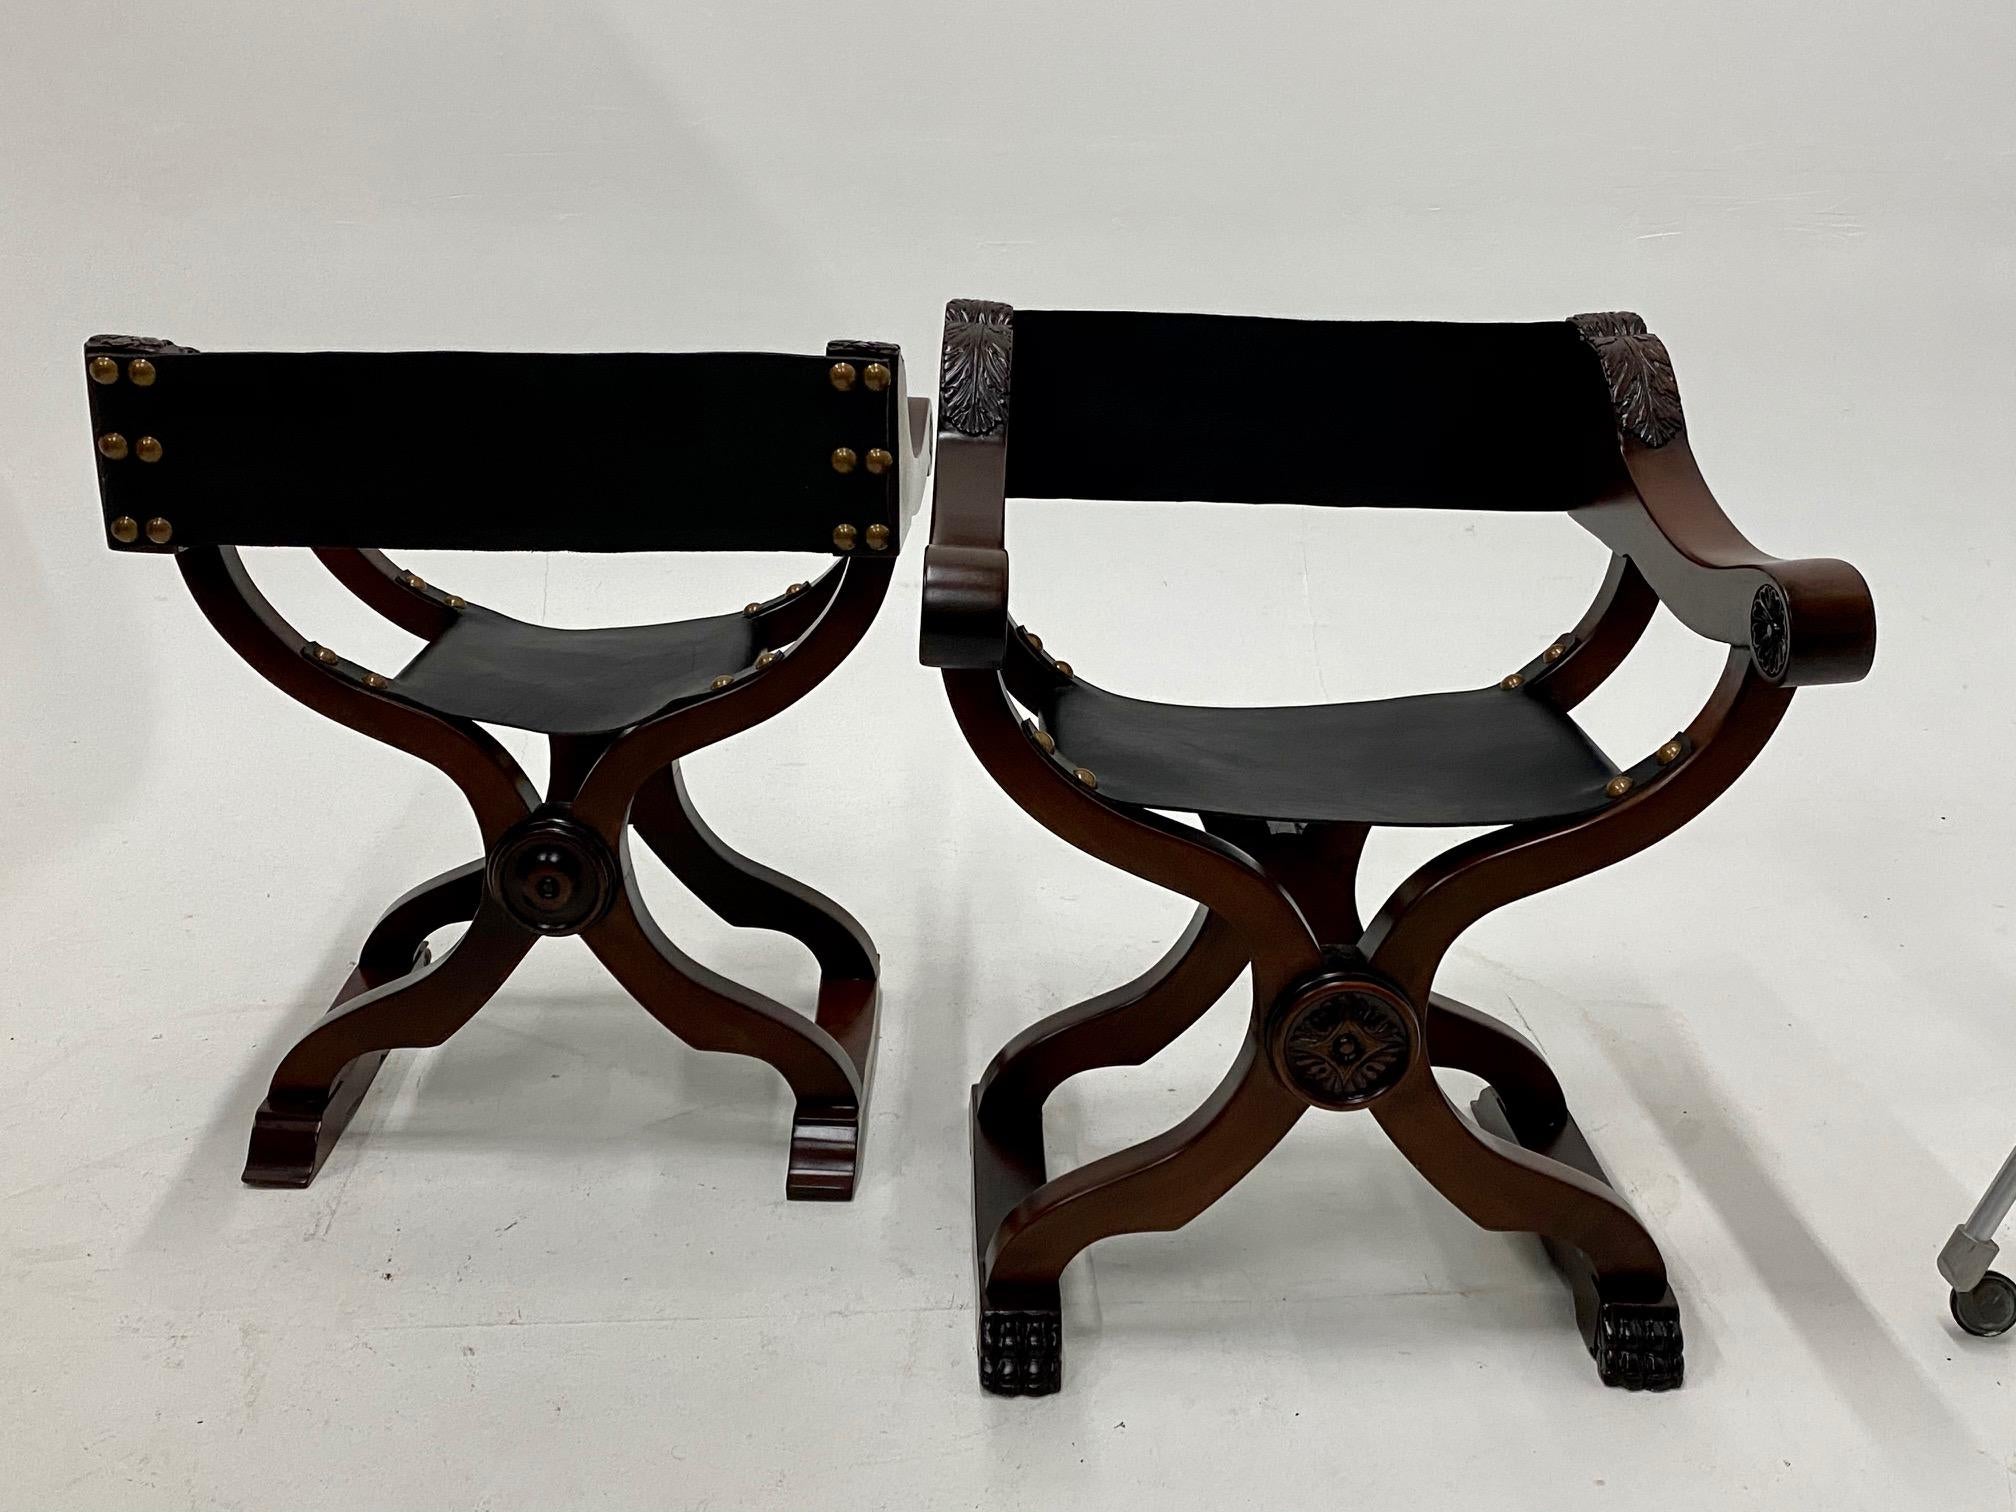 Stunning pair of baroque style Savaranola chairs having rich ashwood frames and supple newly upholstered black leather seats with brass nailheads.